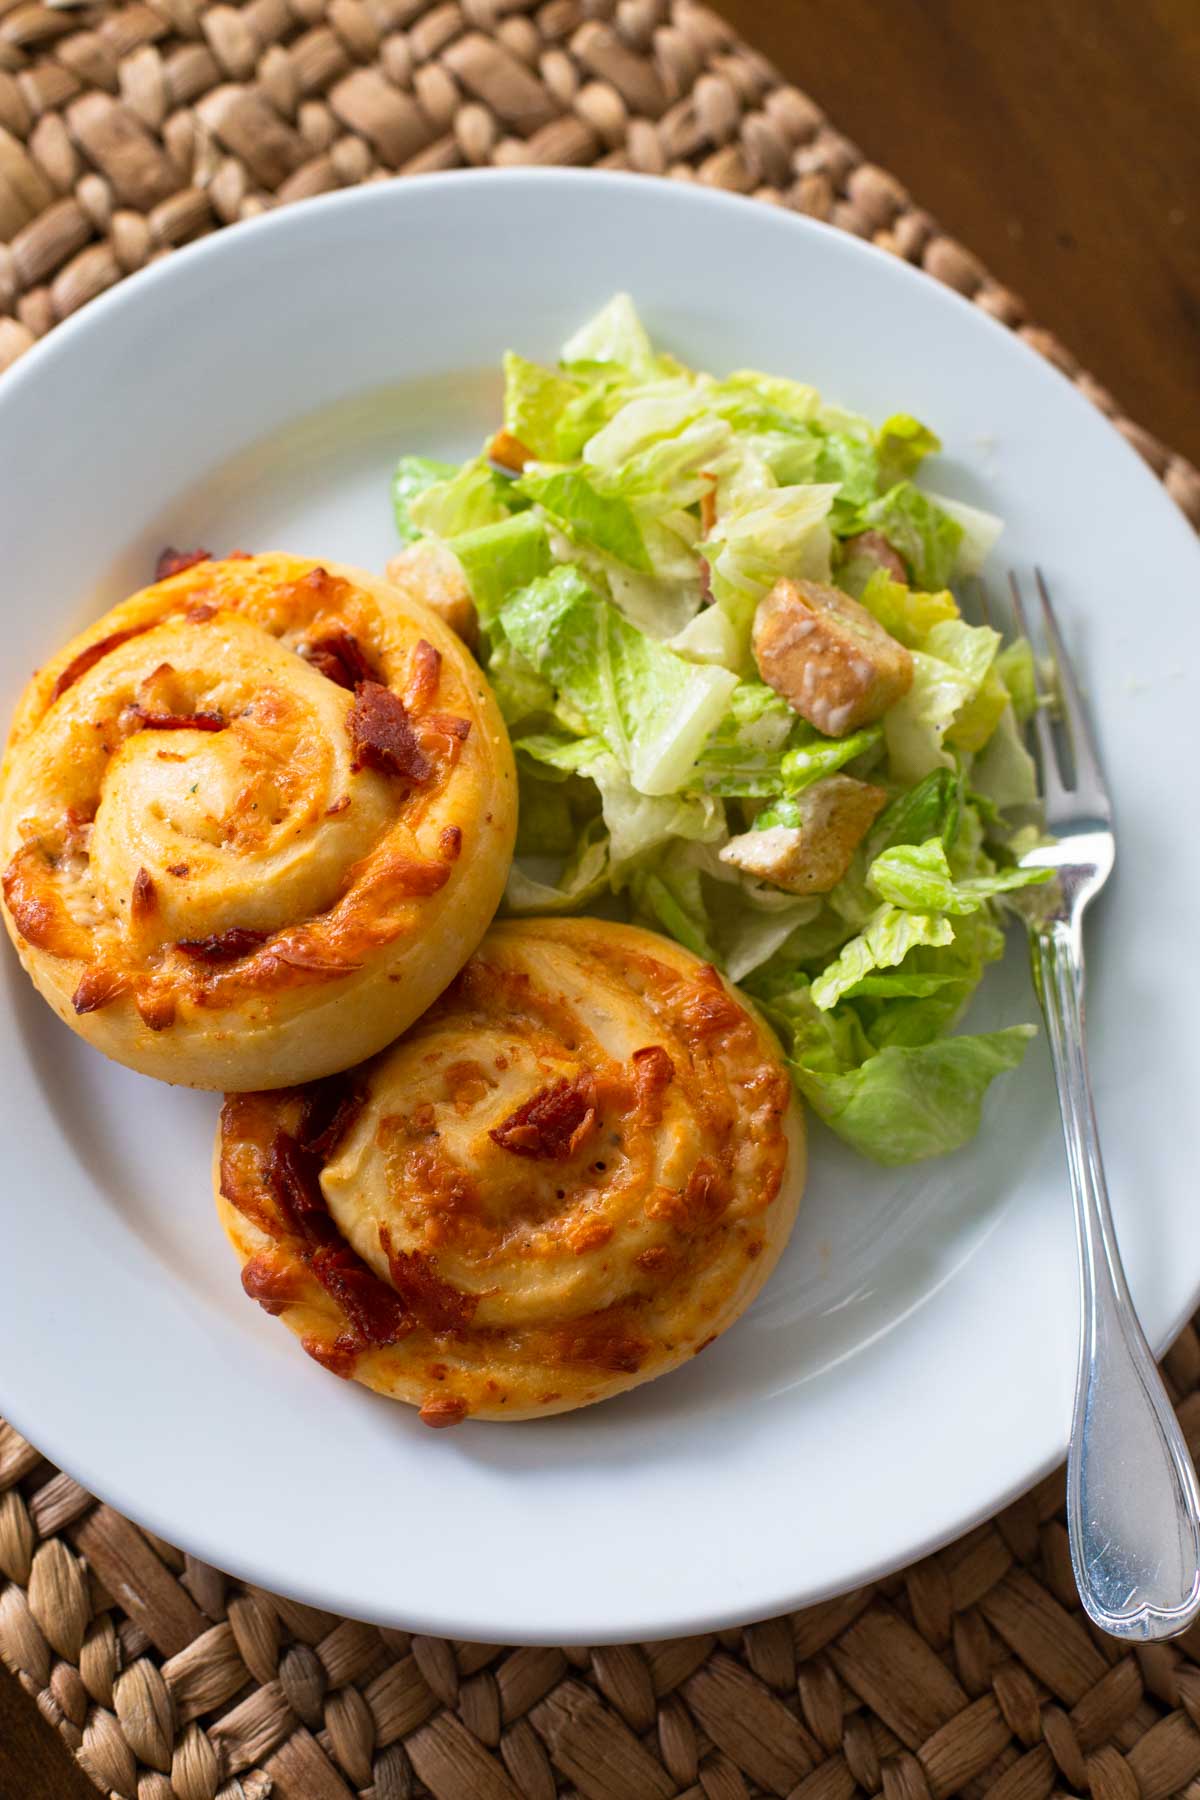 The pizza buns are on a plate next to a green salad with croutons.